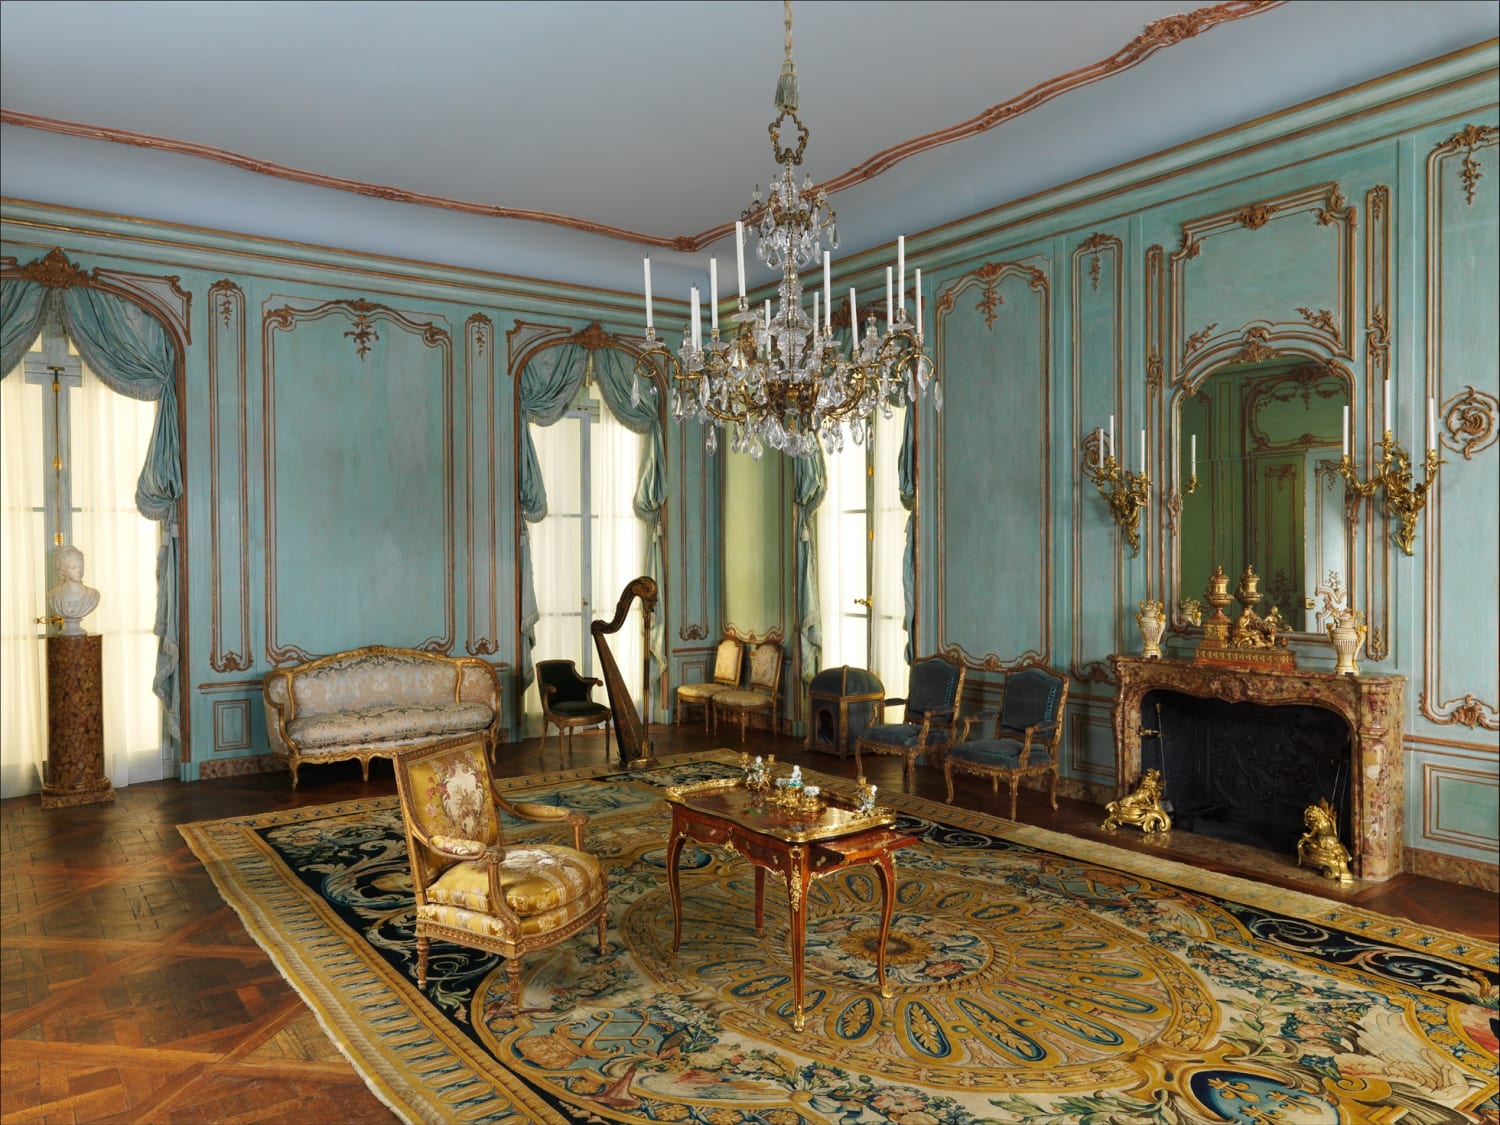 Interpretation of a private room from the Palais Paar, 30 Wollzeile, Vienna, Austria. Designer Isidor Canevale, 1765-72. Now in the Metropolitan Museum of Art, New York City.